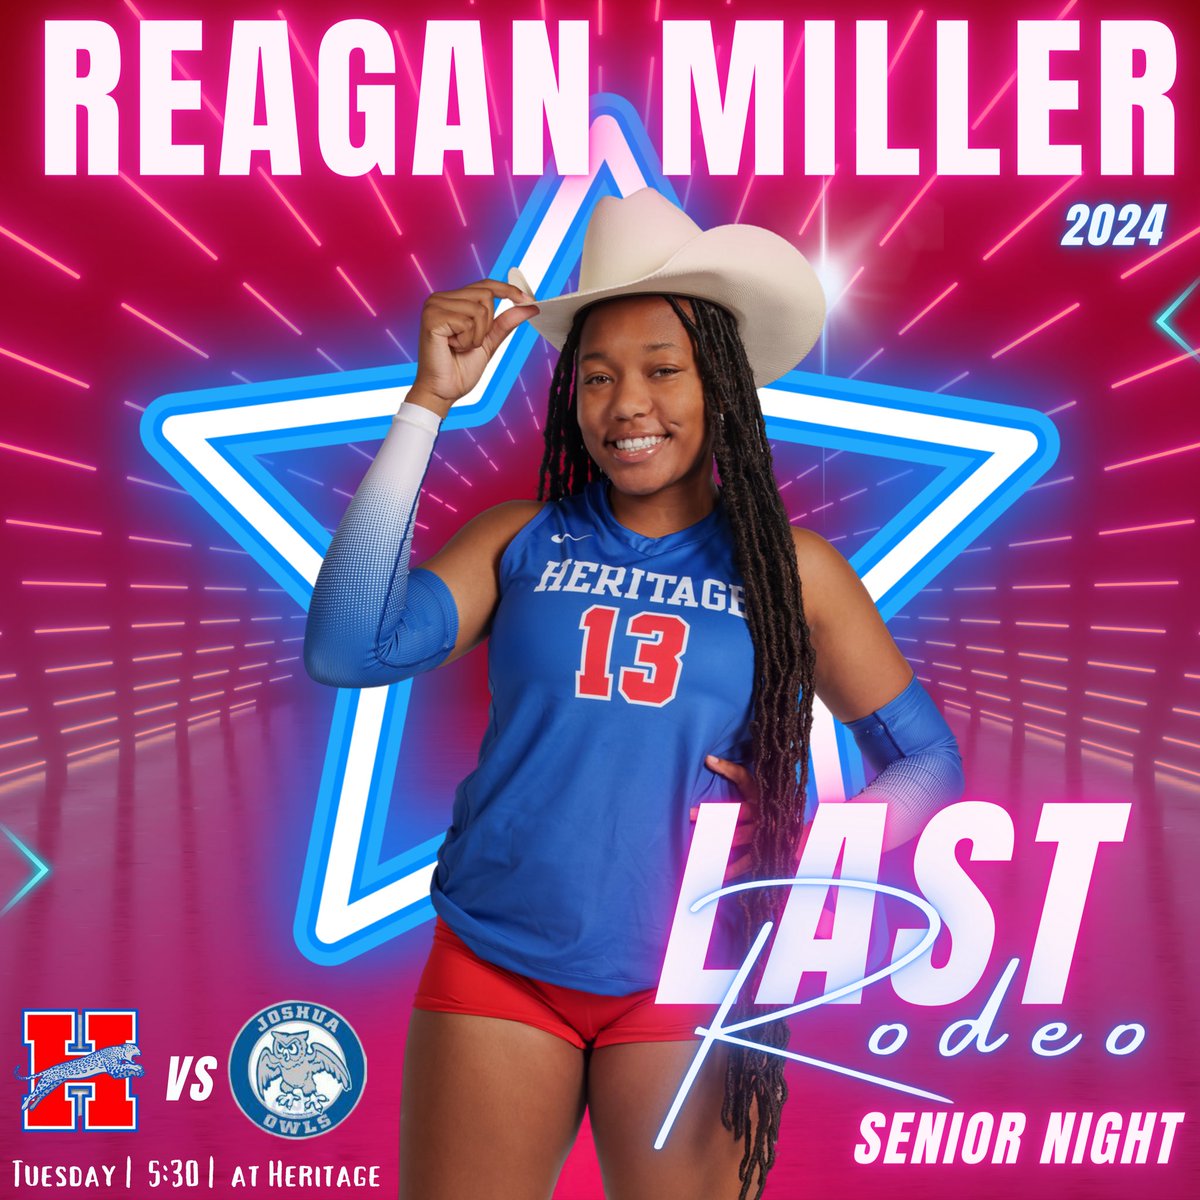 Senior Night “Lick Back” is finally here! Come out and watch a great battle as we play for the 2nd seed! 🗓️ October 24 ⏲️ 5:30 PM Versus Joshua 📸@KenMurphyPhoto 🎨: @MabraDodie #LastRodeo #DTDWIT @jaguarvball @jaguarvball_bc #volleyballgirls #uncommitted2024